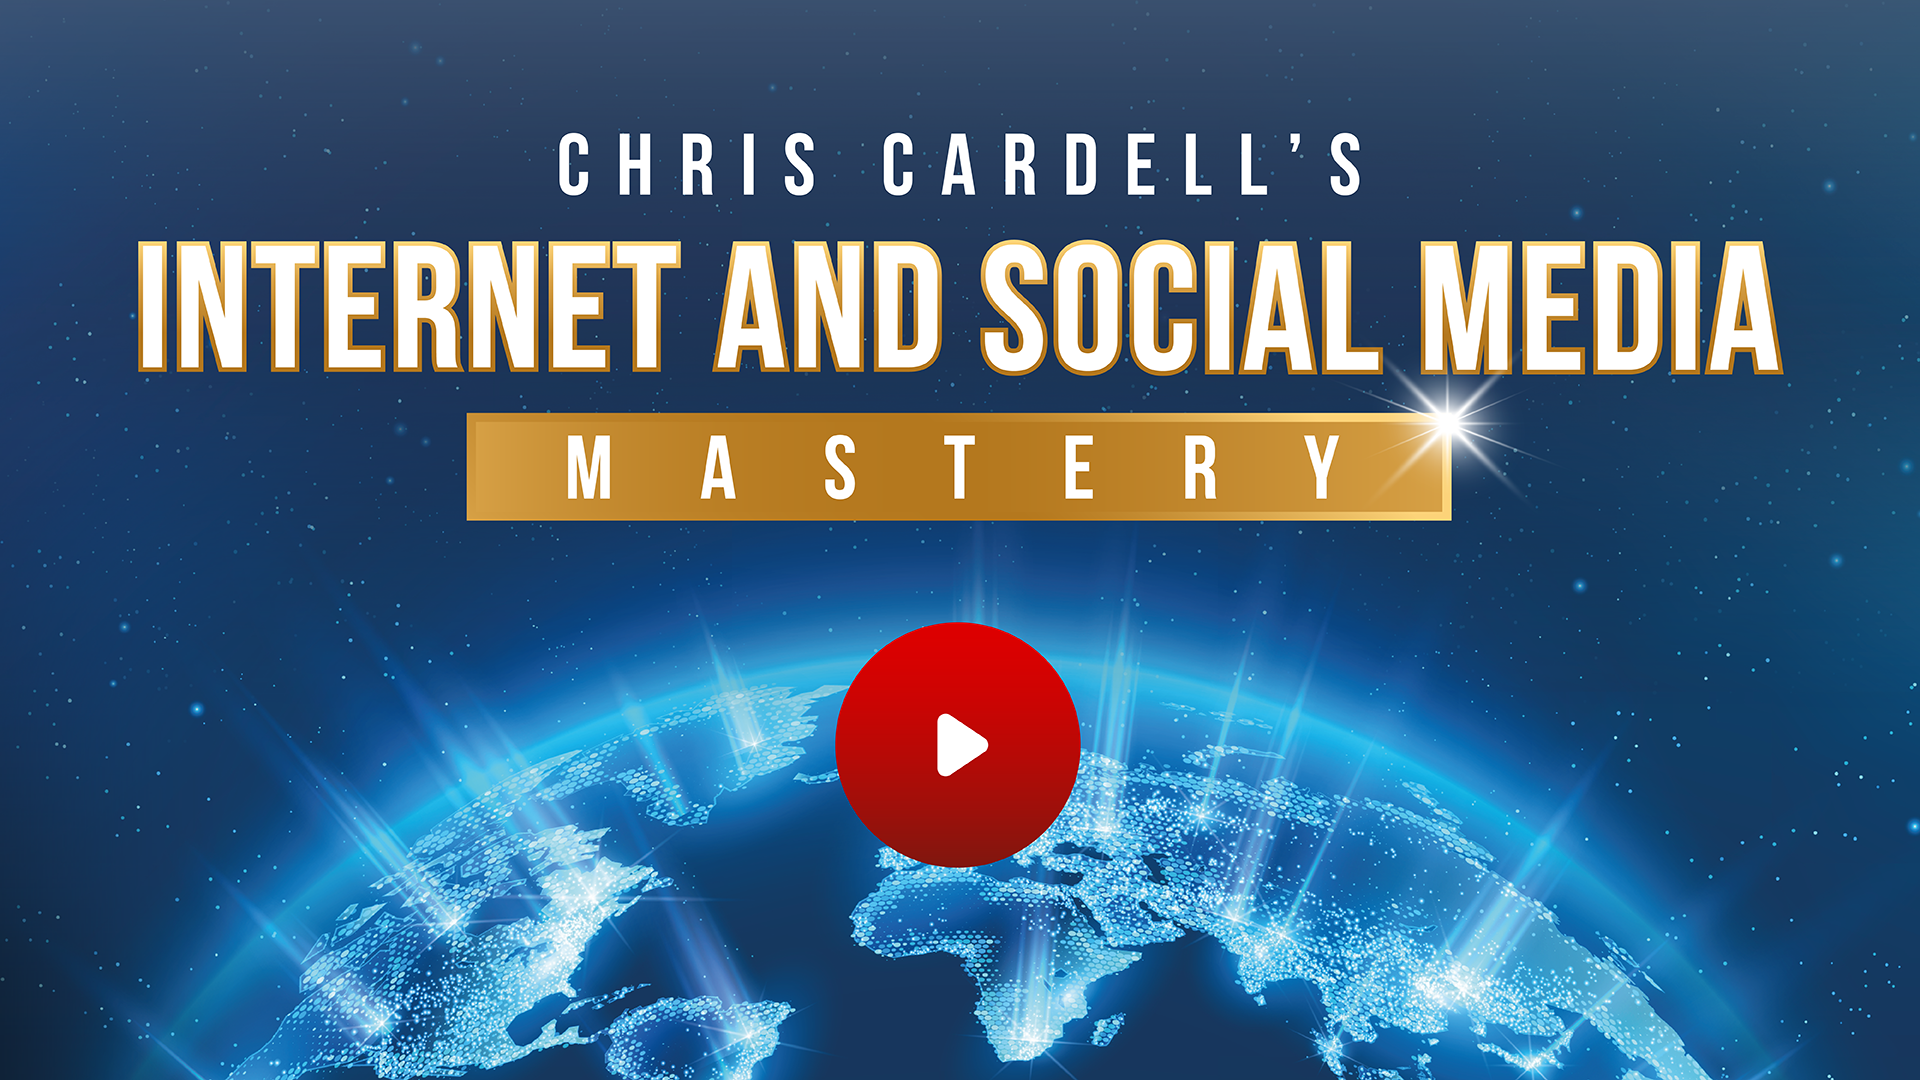 Internet And Social Media Mastery For Video Links